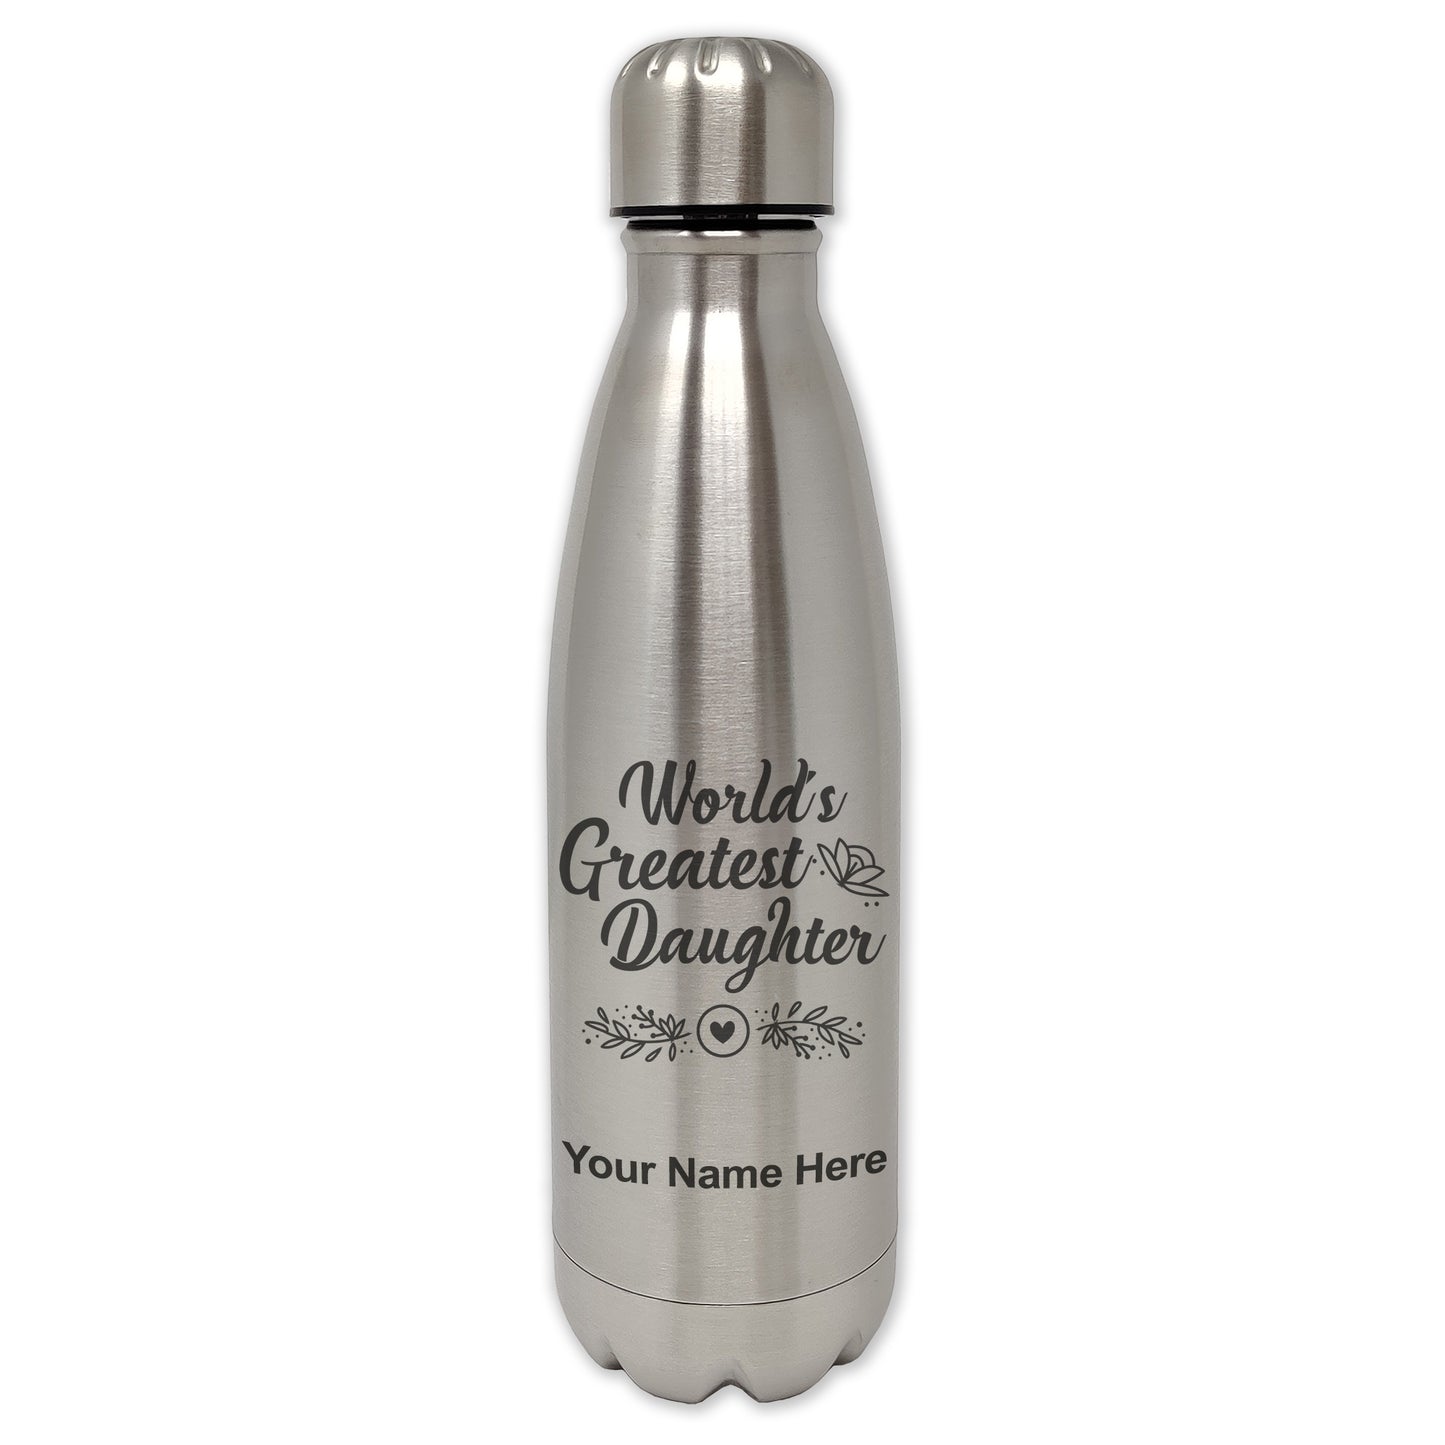 LaserGram Single Wall Water Bottle, World's Greatest Daughter, Personalized Engraving Included